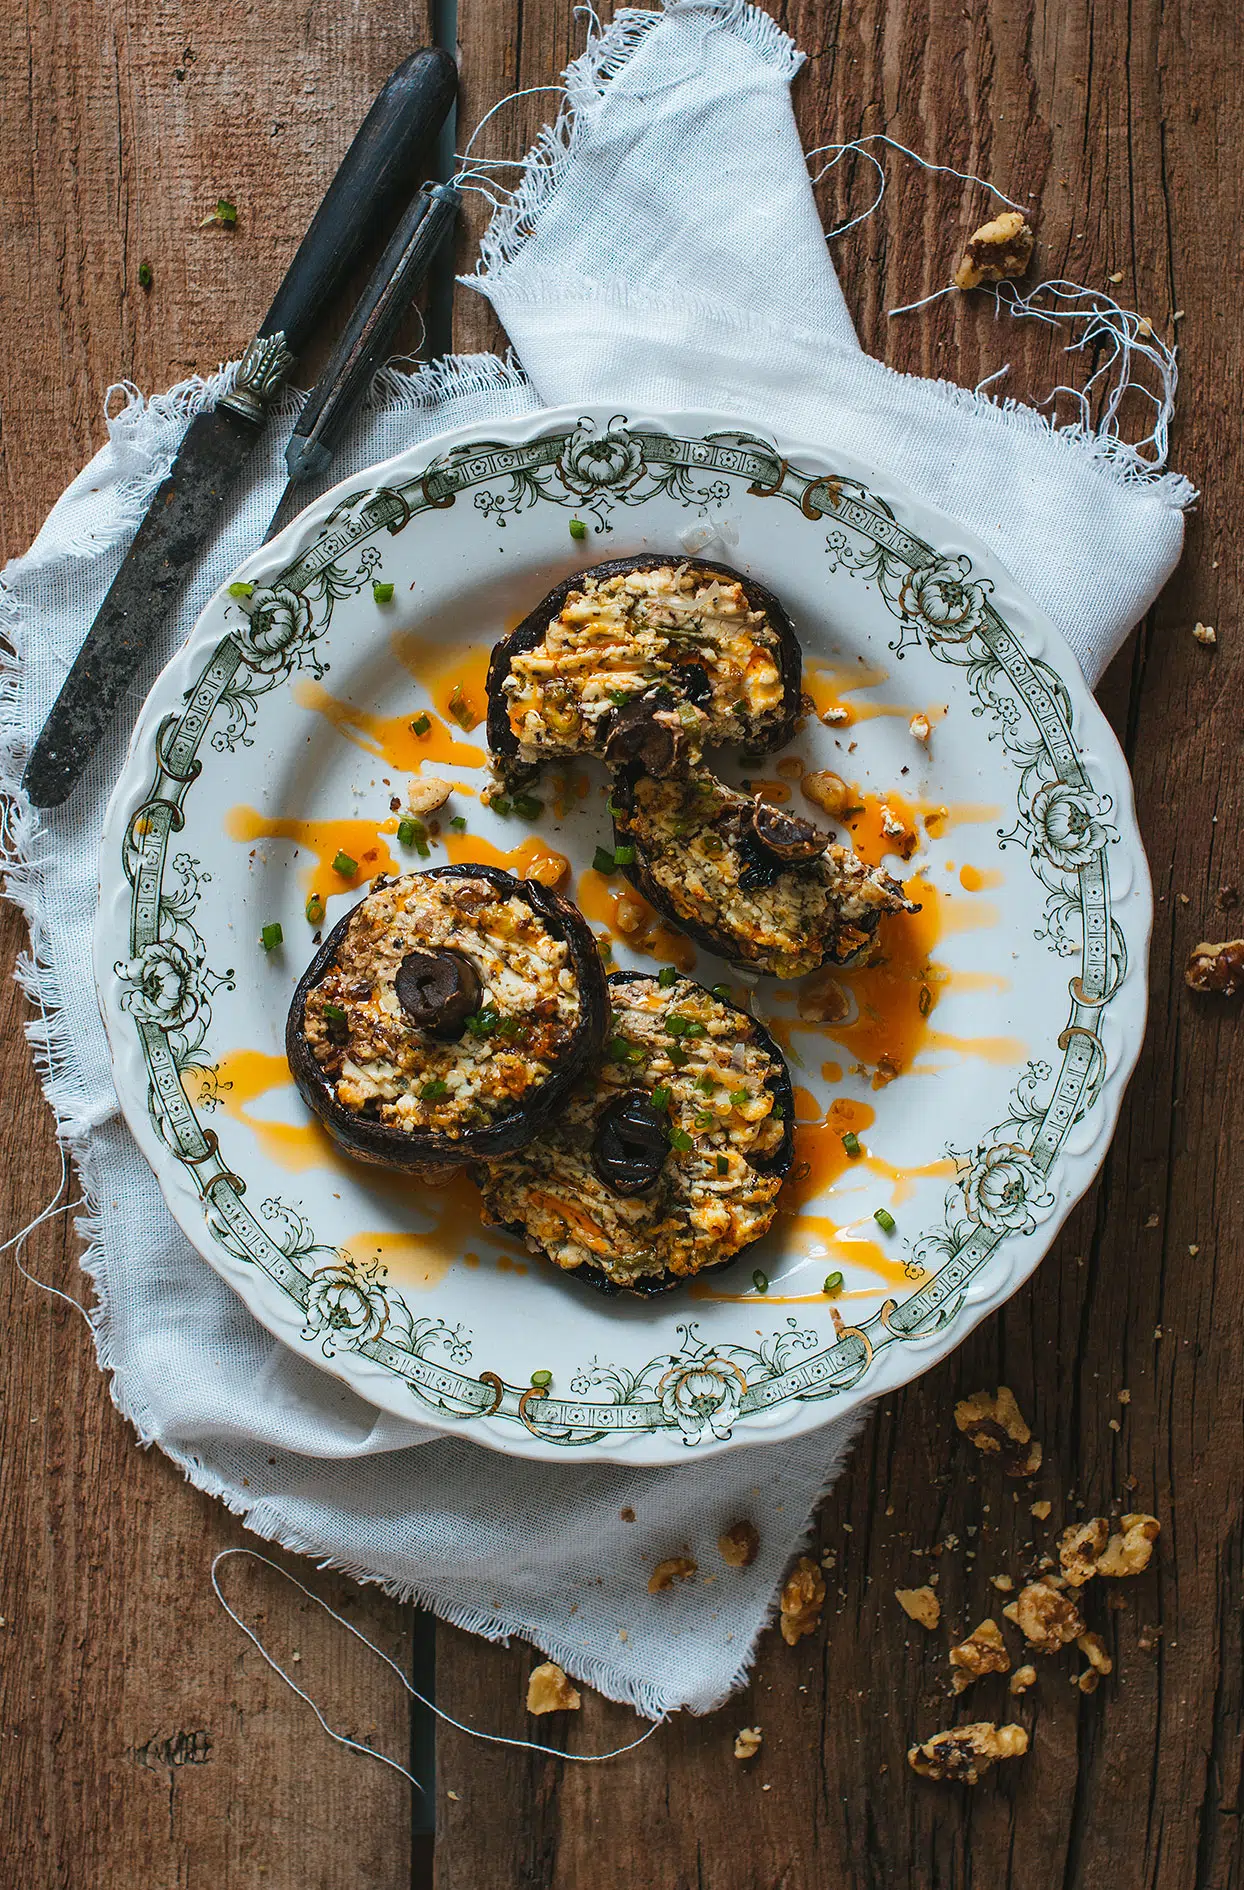 Stuffed Portobellos with goat cheese and sugared nuts